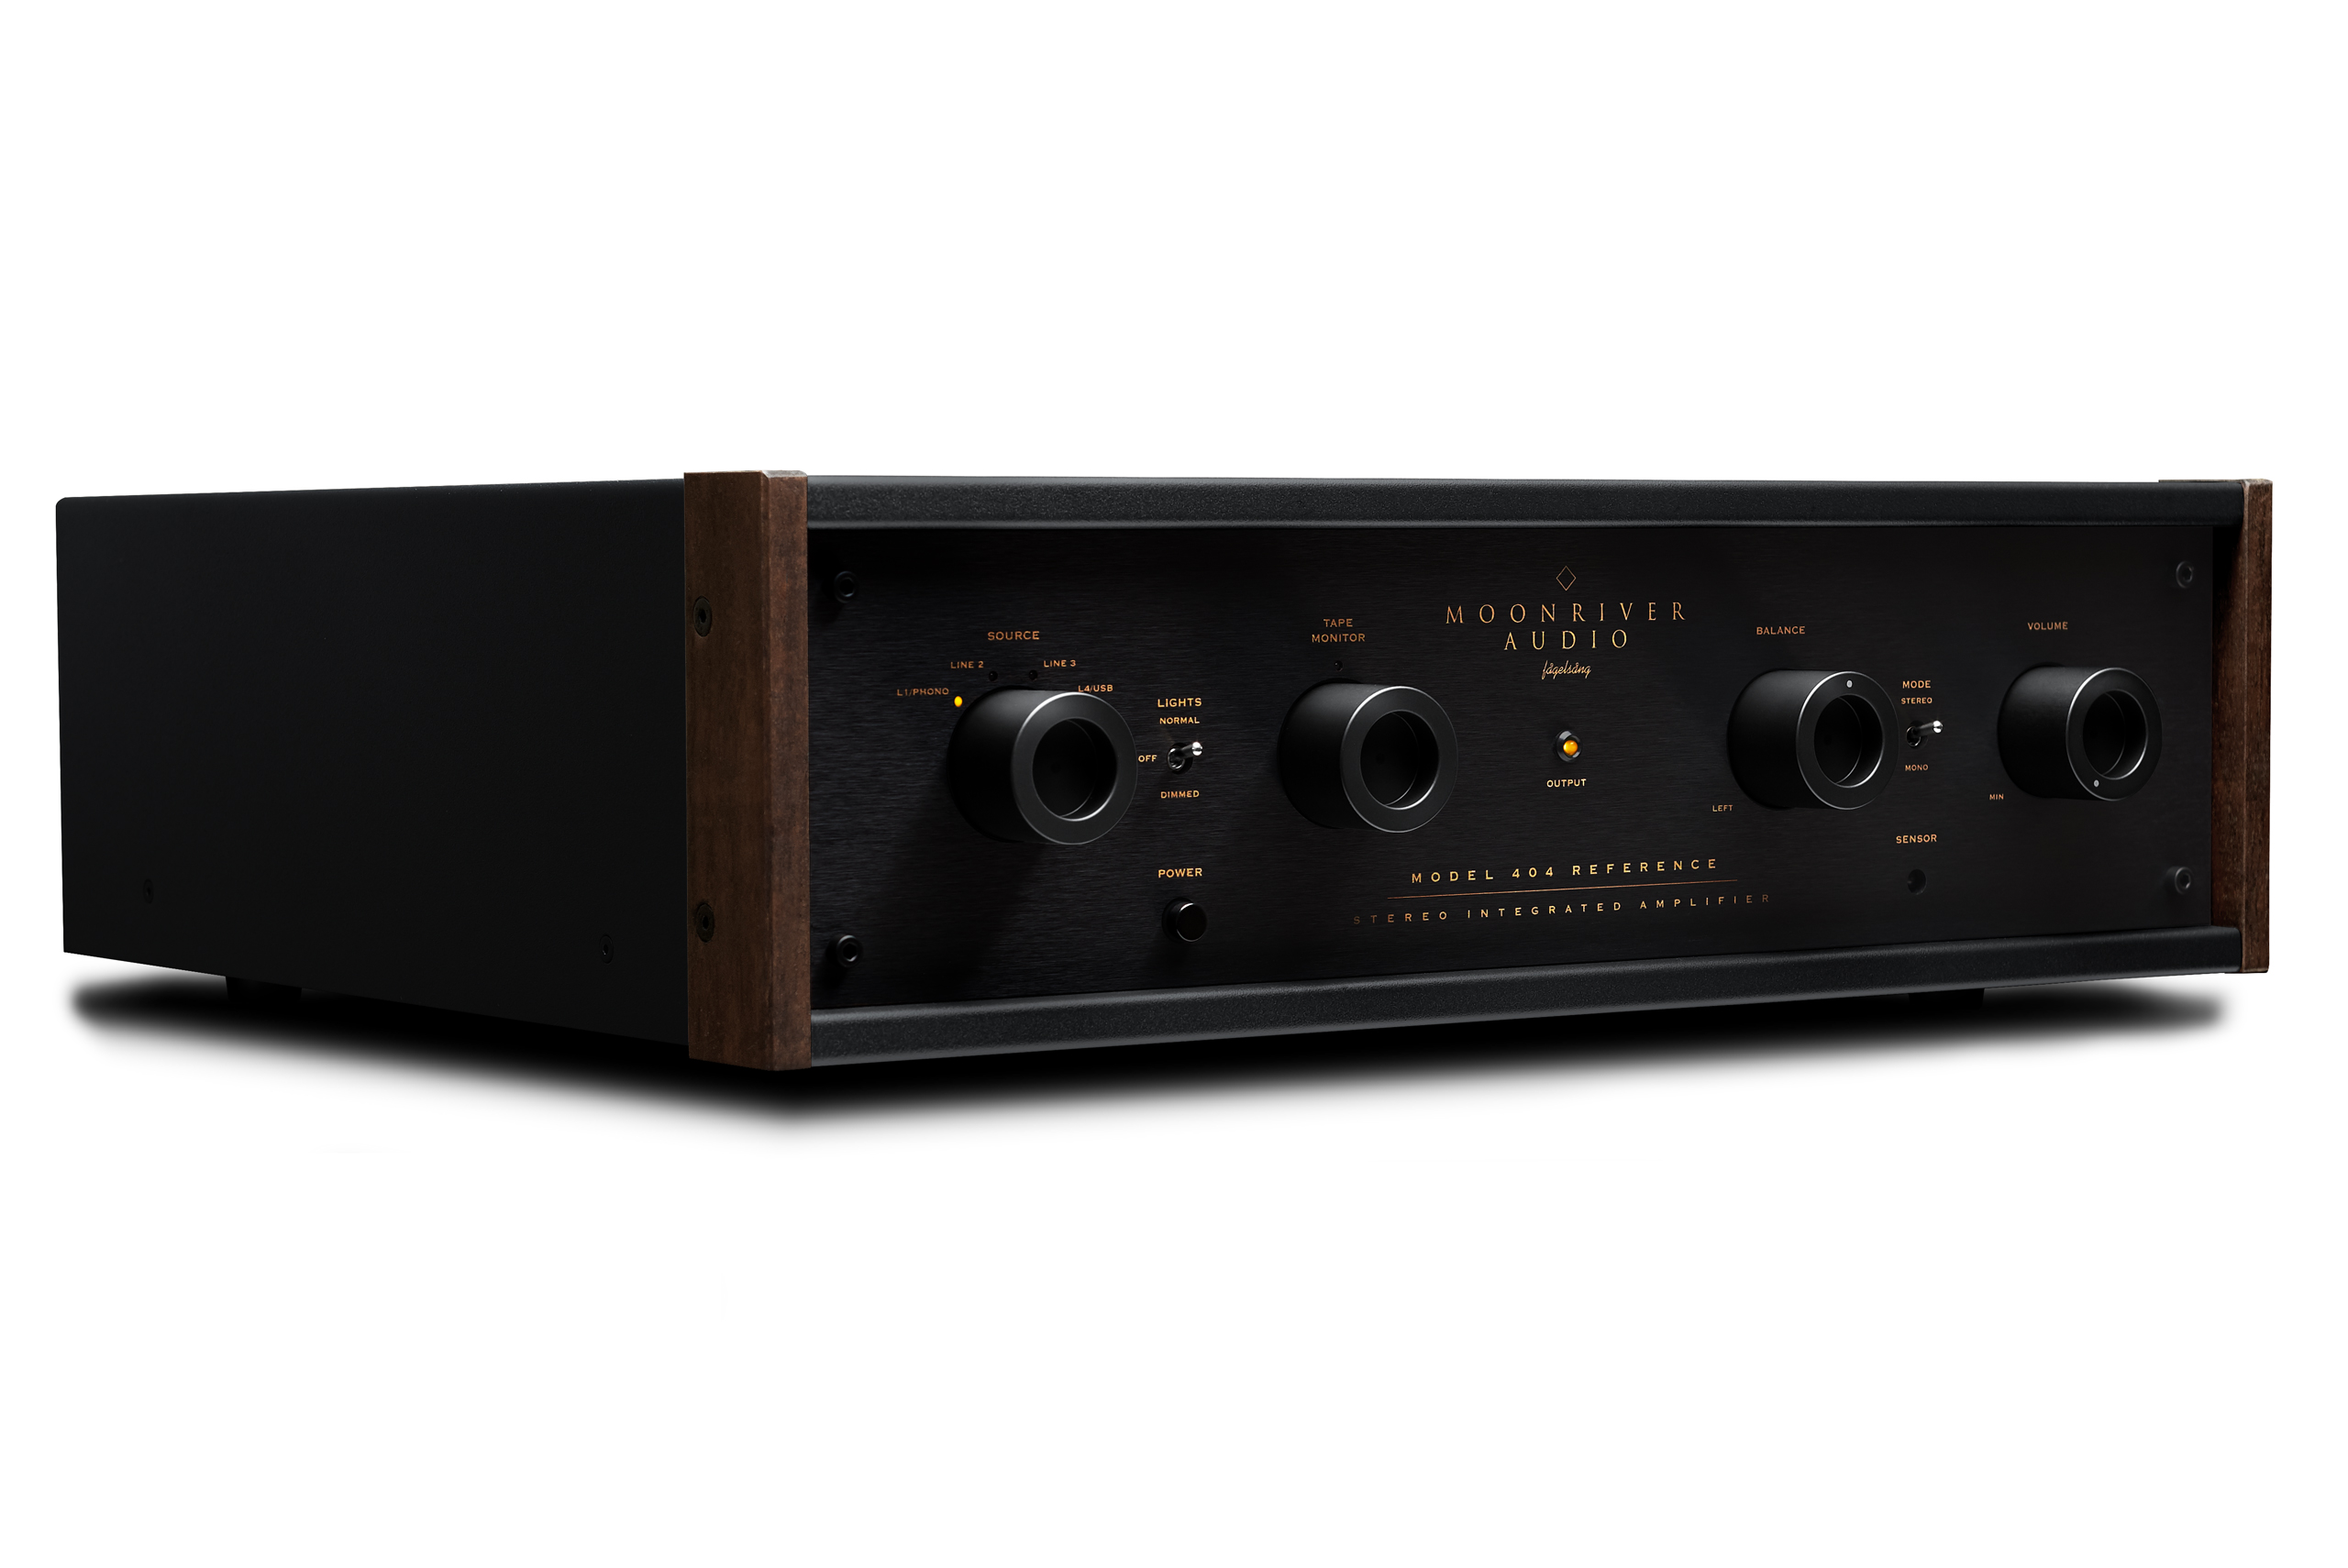 The 404 Reference integrated amplifier – Moonriver Audio